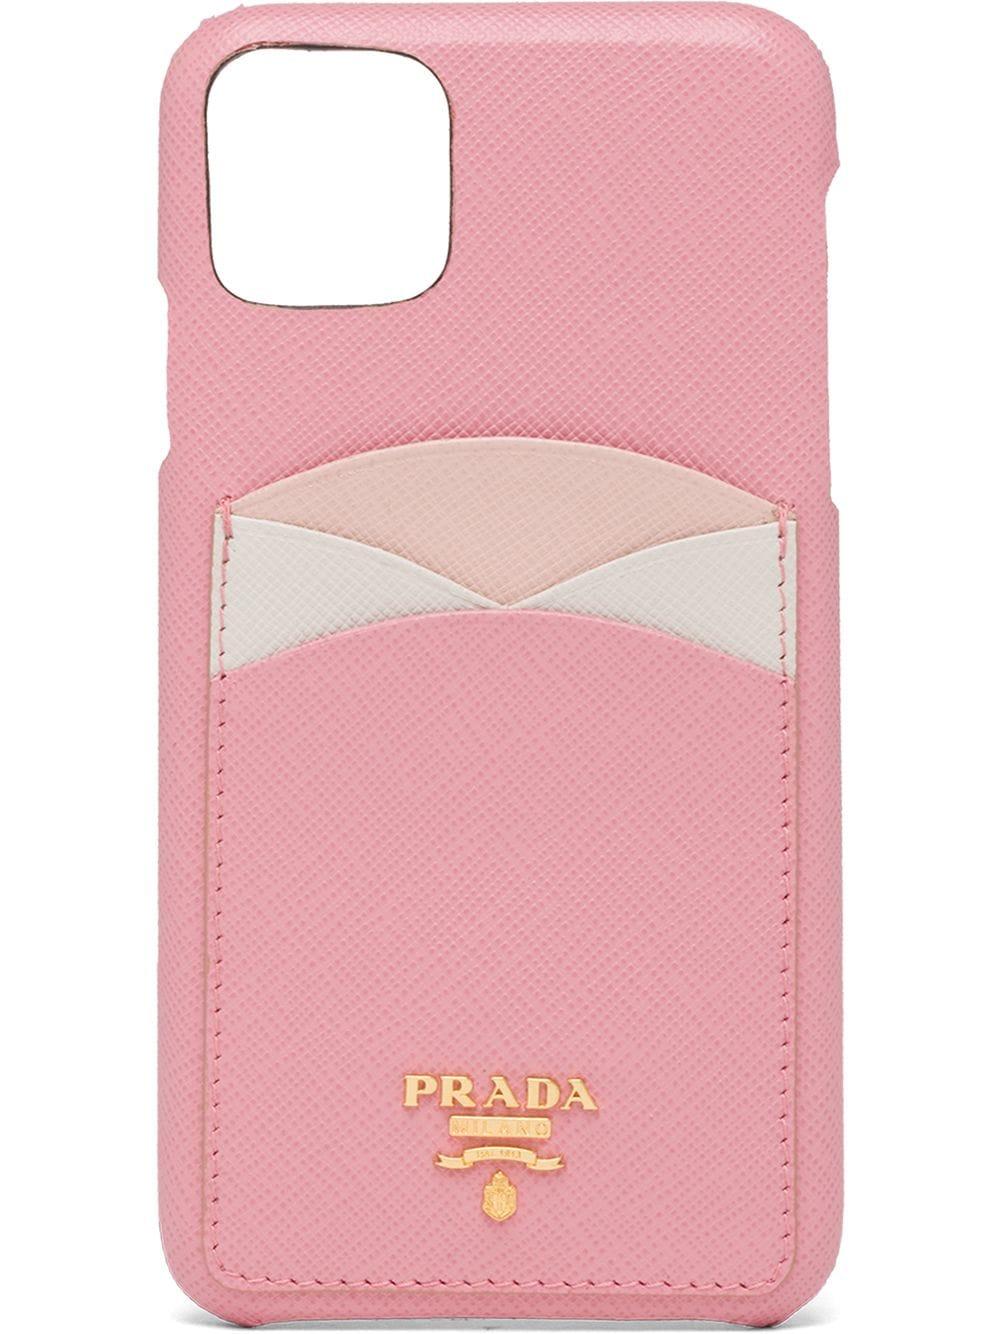 Prada Leather Colour-block Iphone 11 Pro Max Case in Pink | Lyst